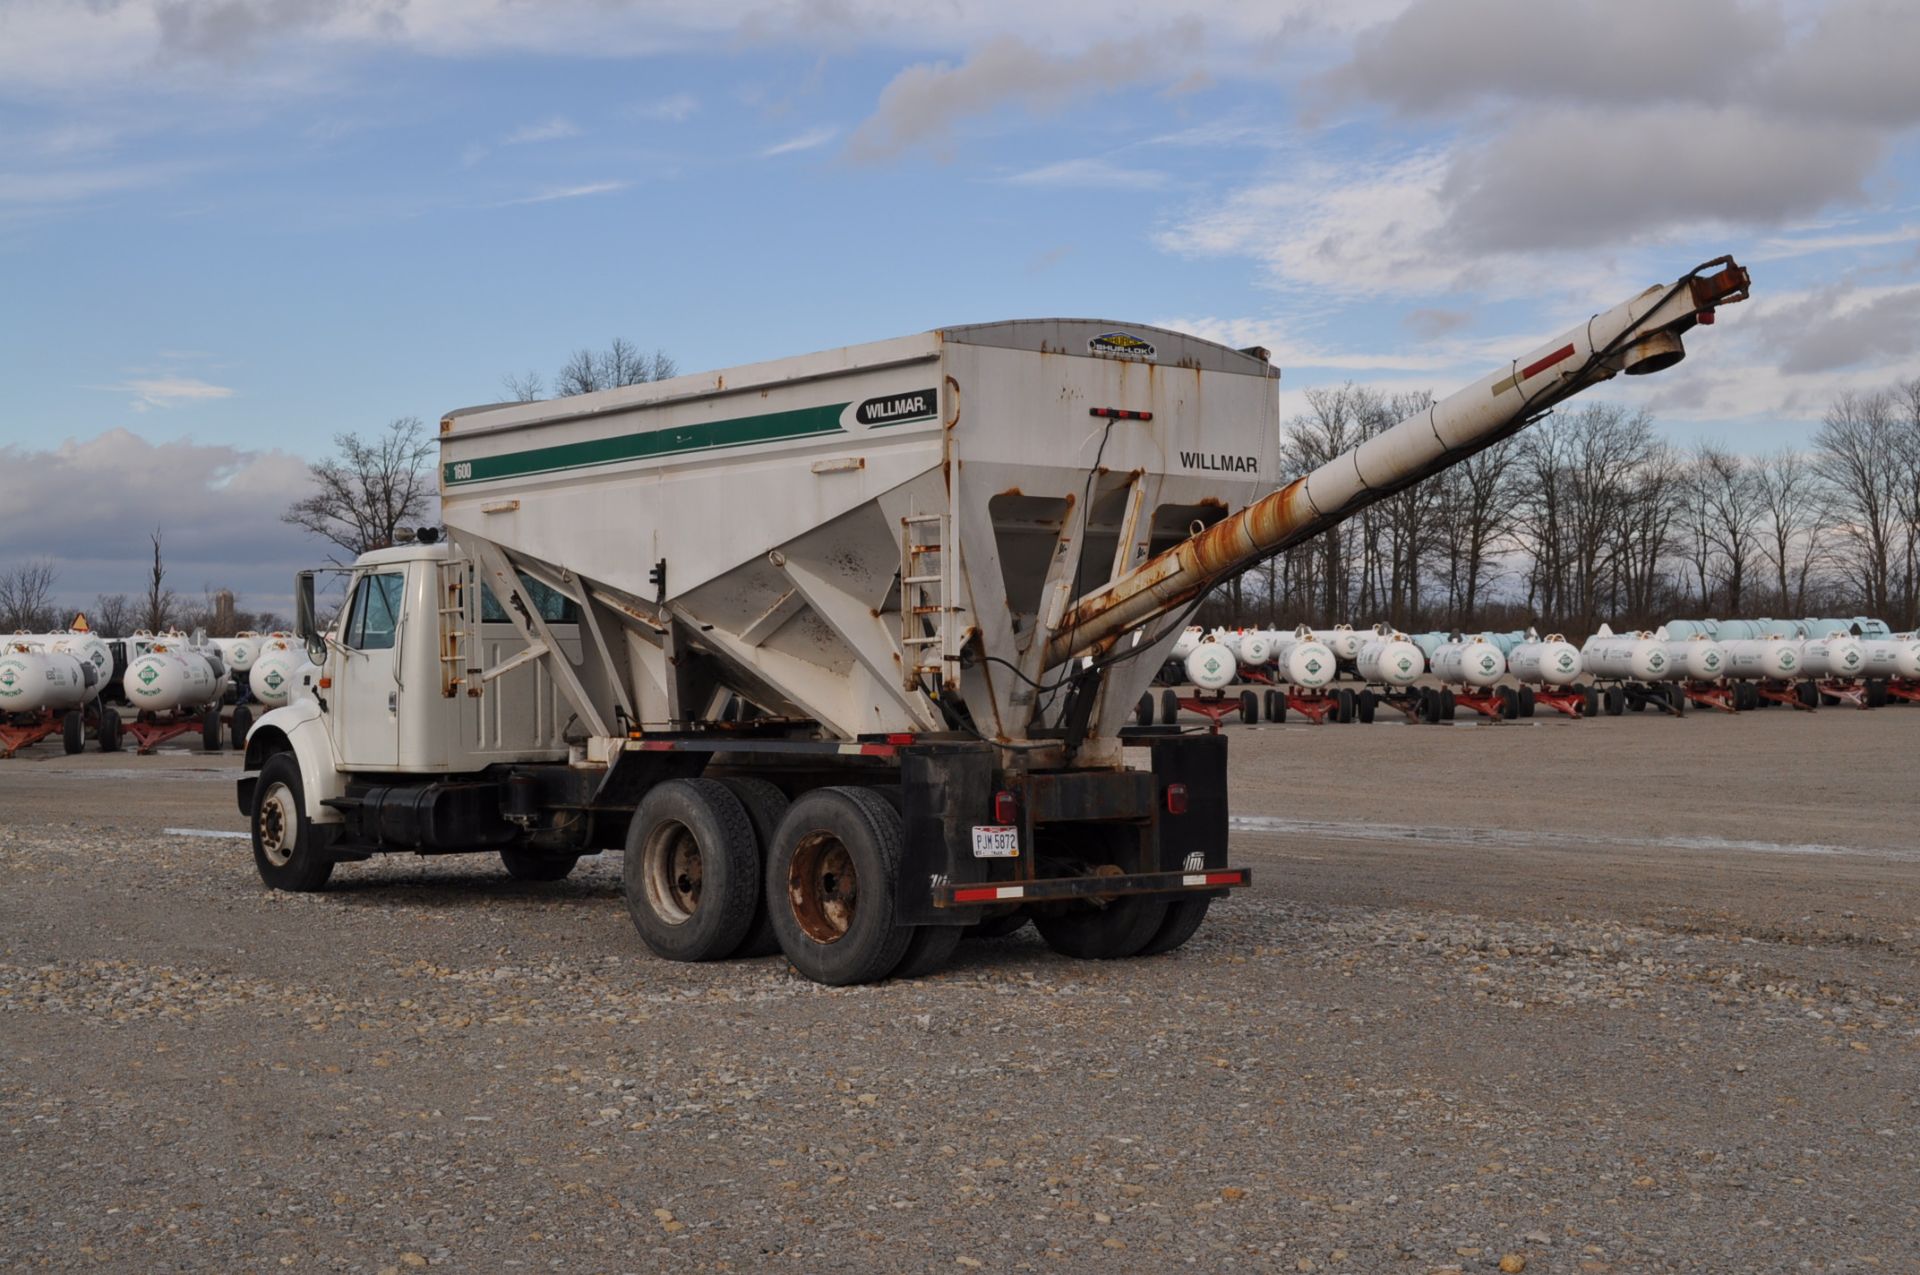 2002 International 4900 w/ Willmar 16-ton bed, rear auger, DT466E engine needs work, 7-speed, PTO - Image 4 of 21